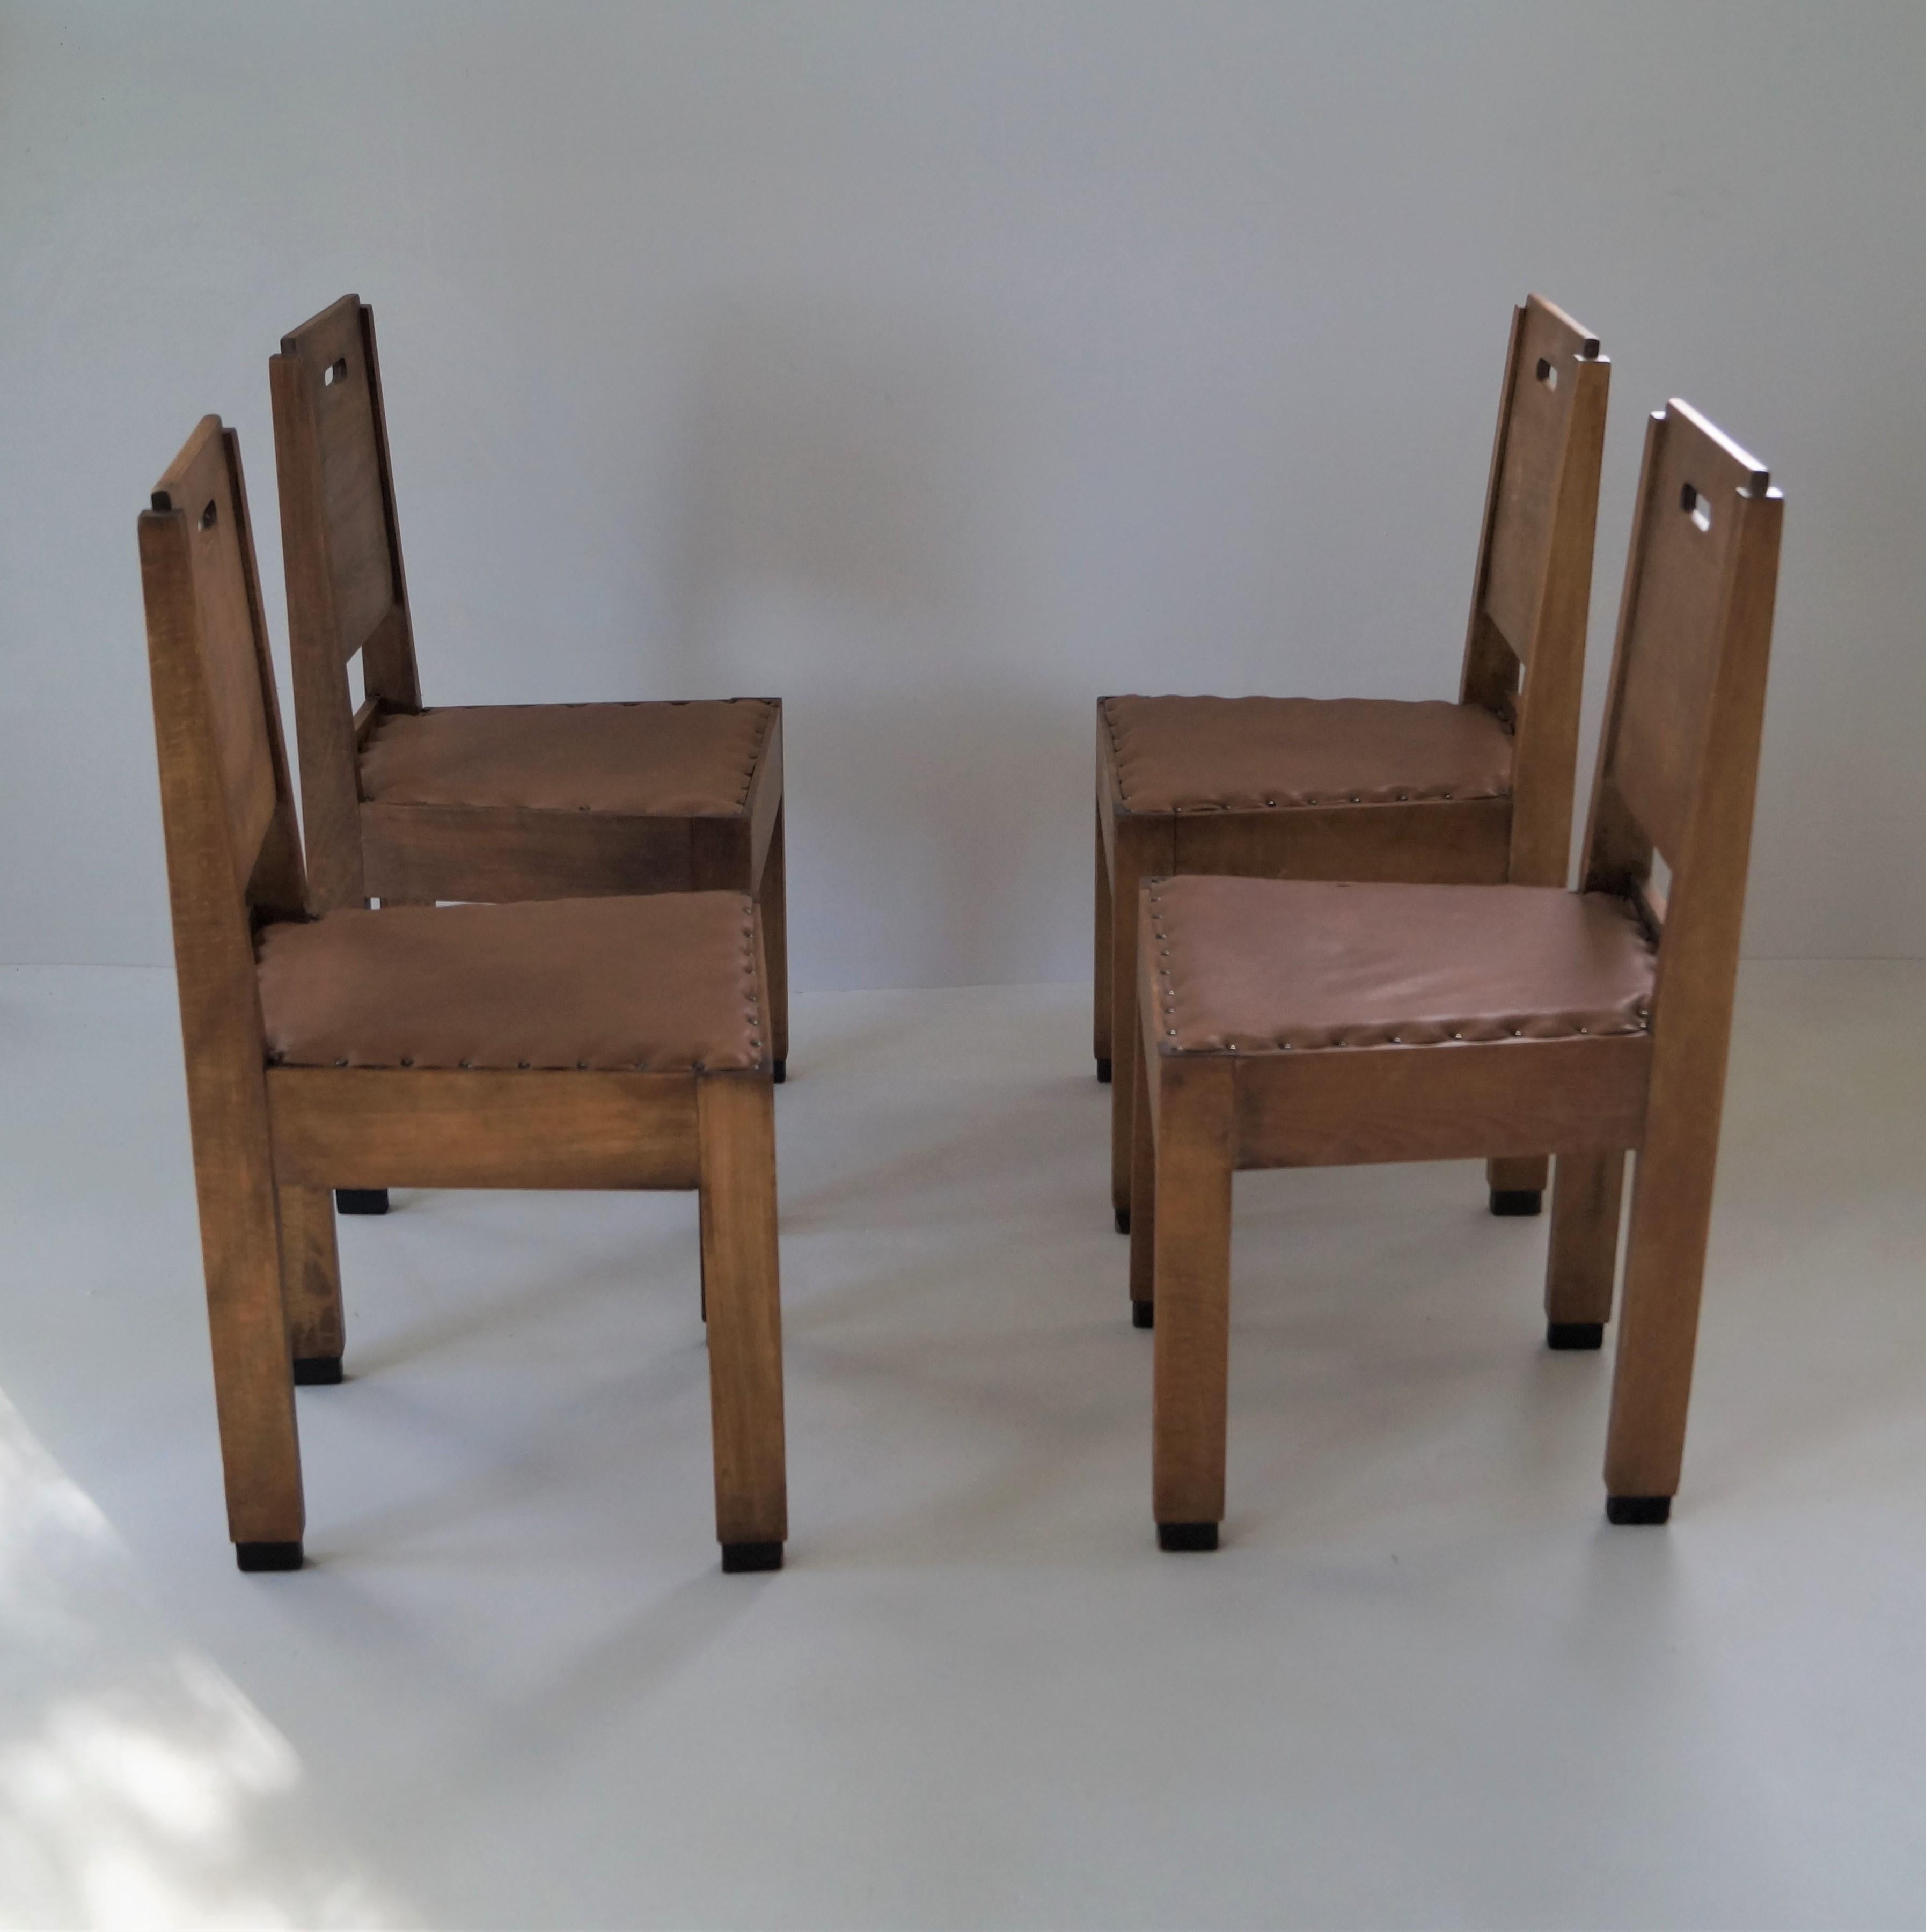 Early 20th Century Dutch Art Deco De Stijl/Haagse School set of chairs, 1920s For Sale